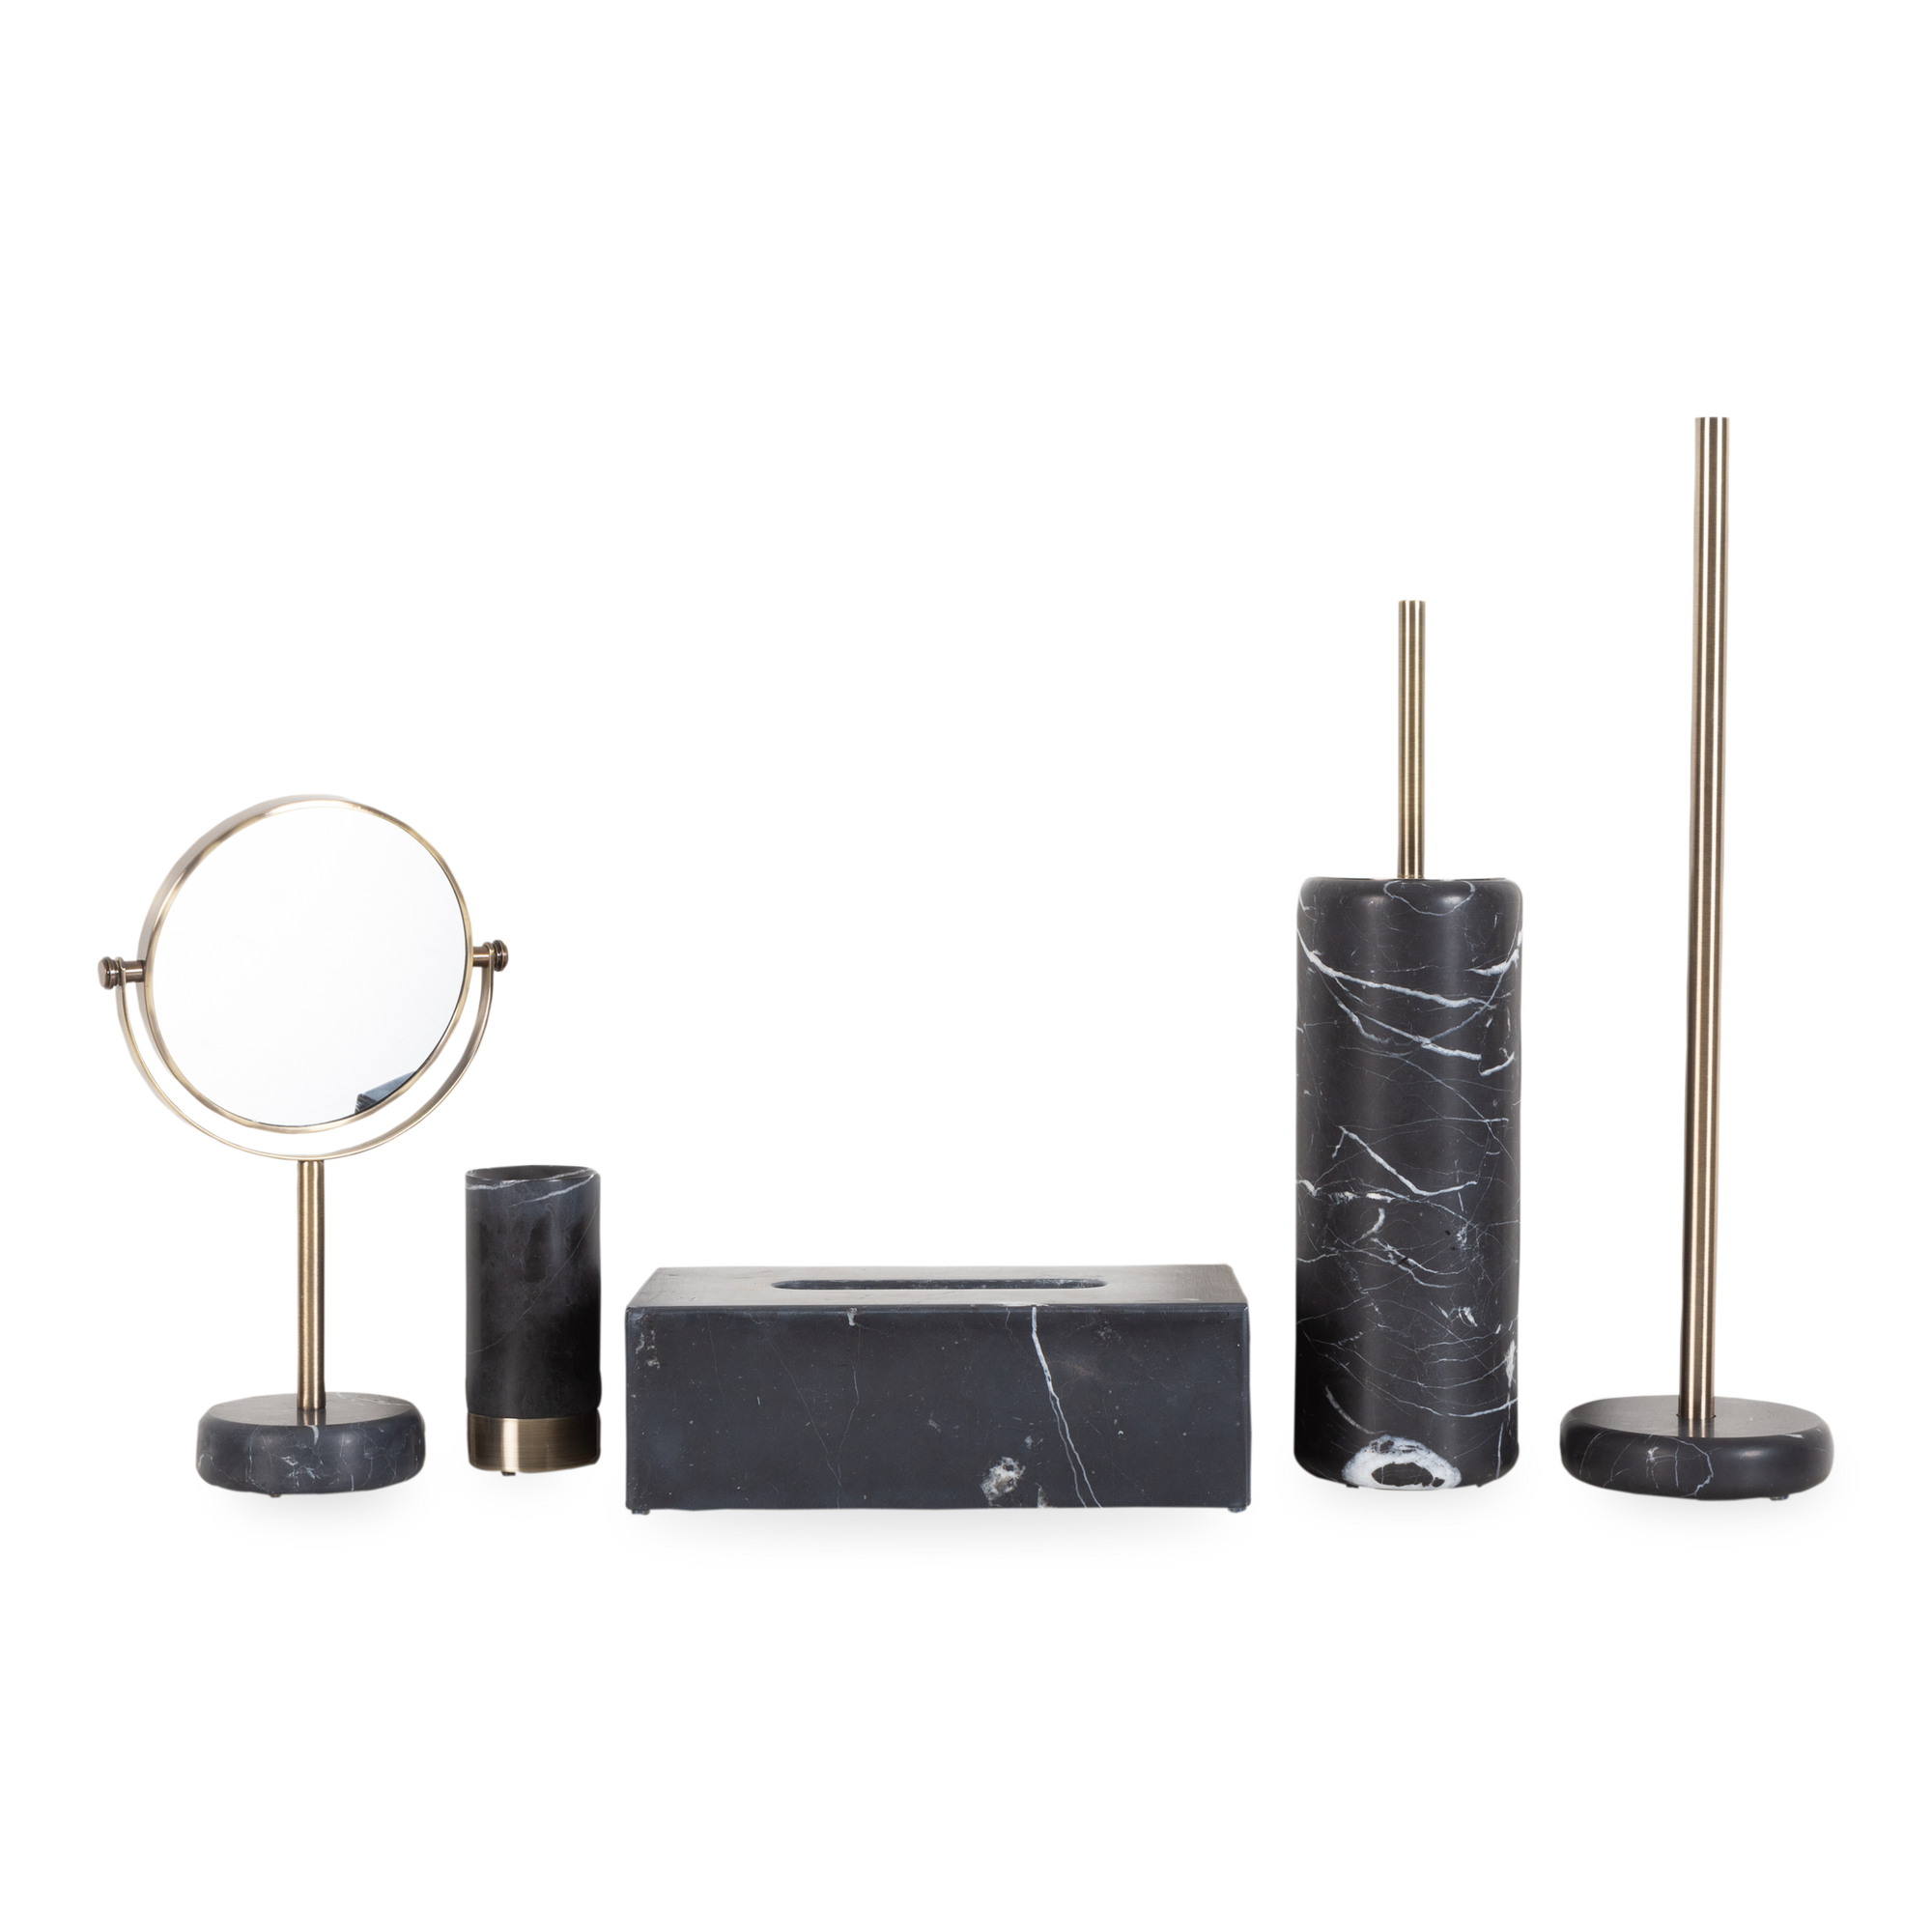 The Nero Collection is handmade which makes each of them a special part of your bathroom.